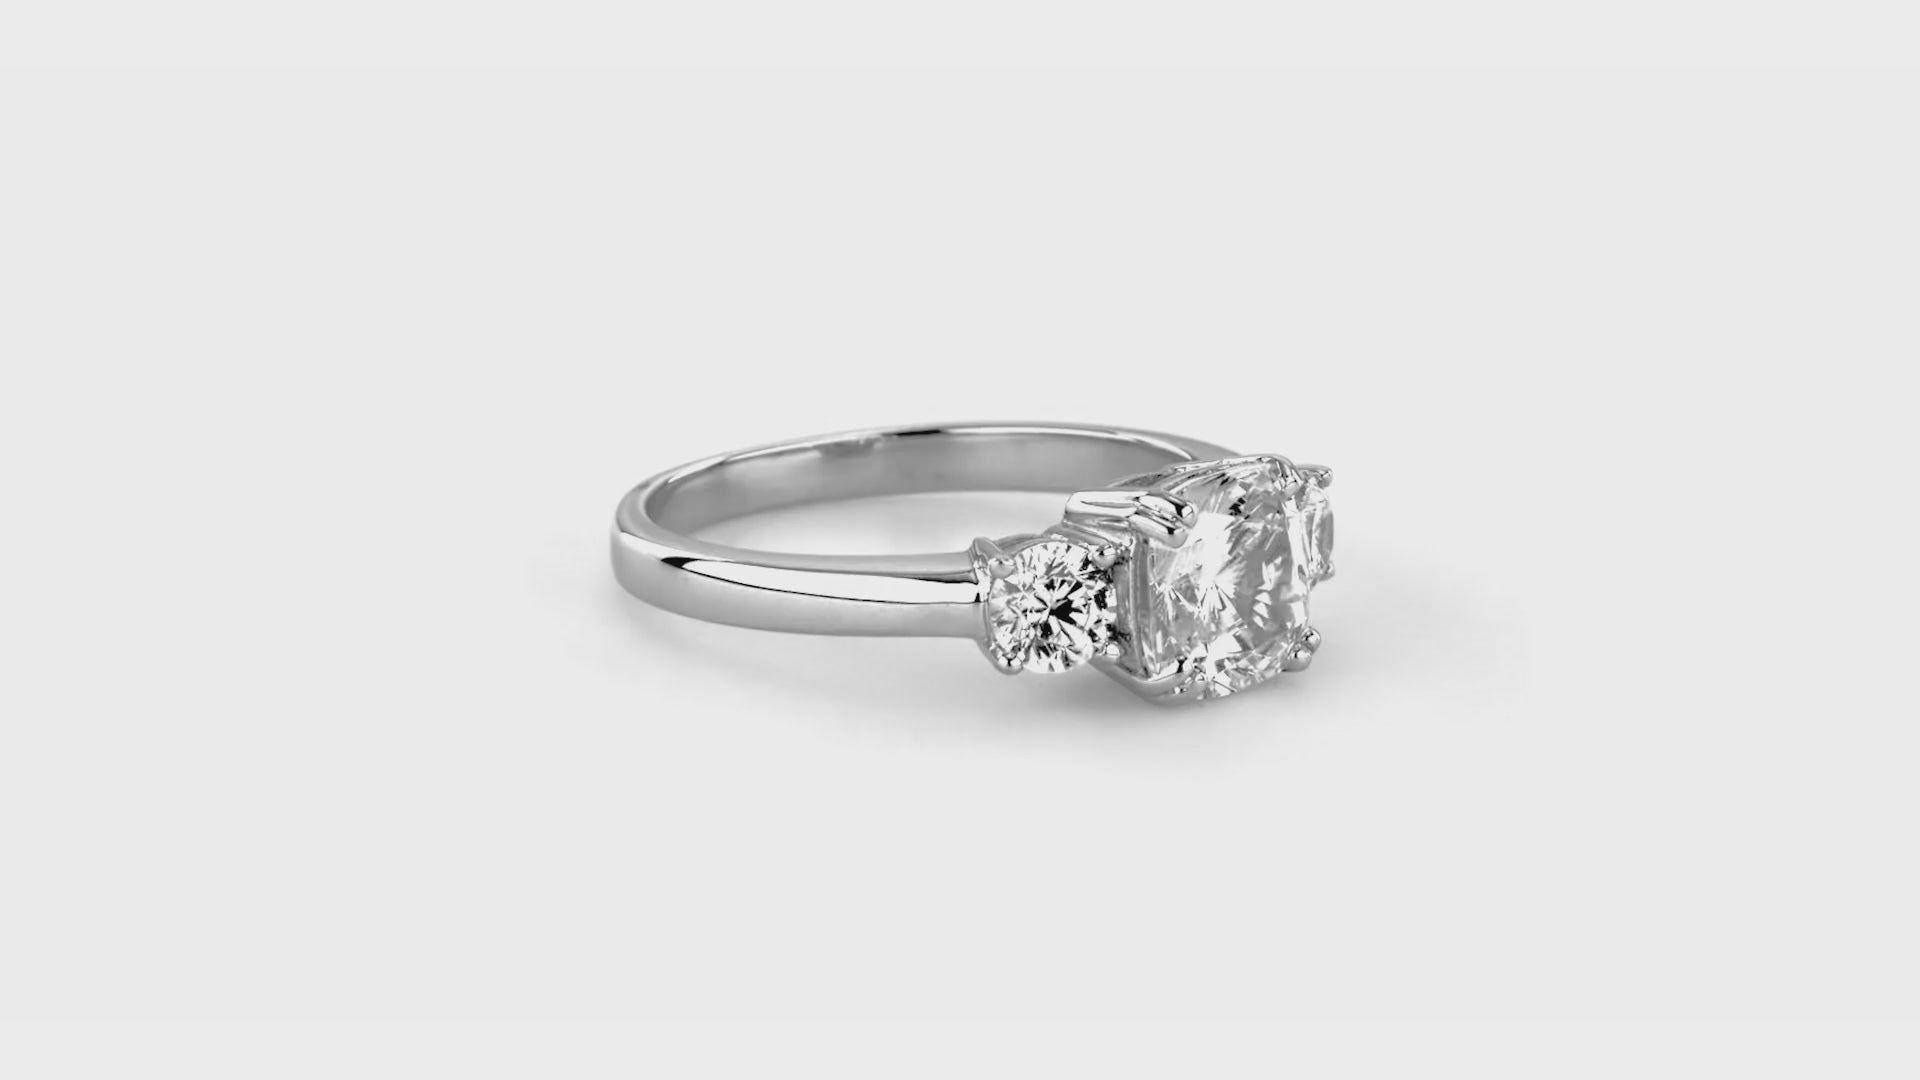 Video Contains 3-Stone 7-Stone Cushion CZ Ring Set in Sterling Silver. Style Number VR450-02